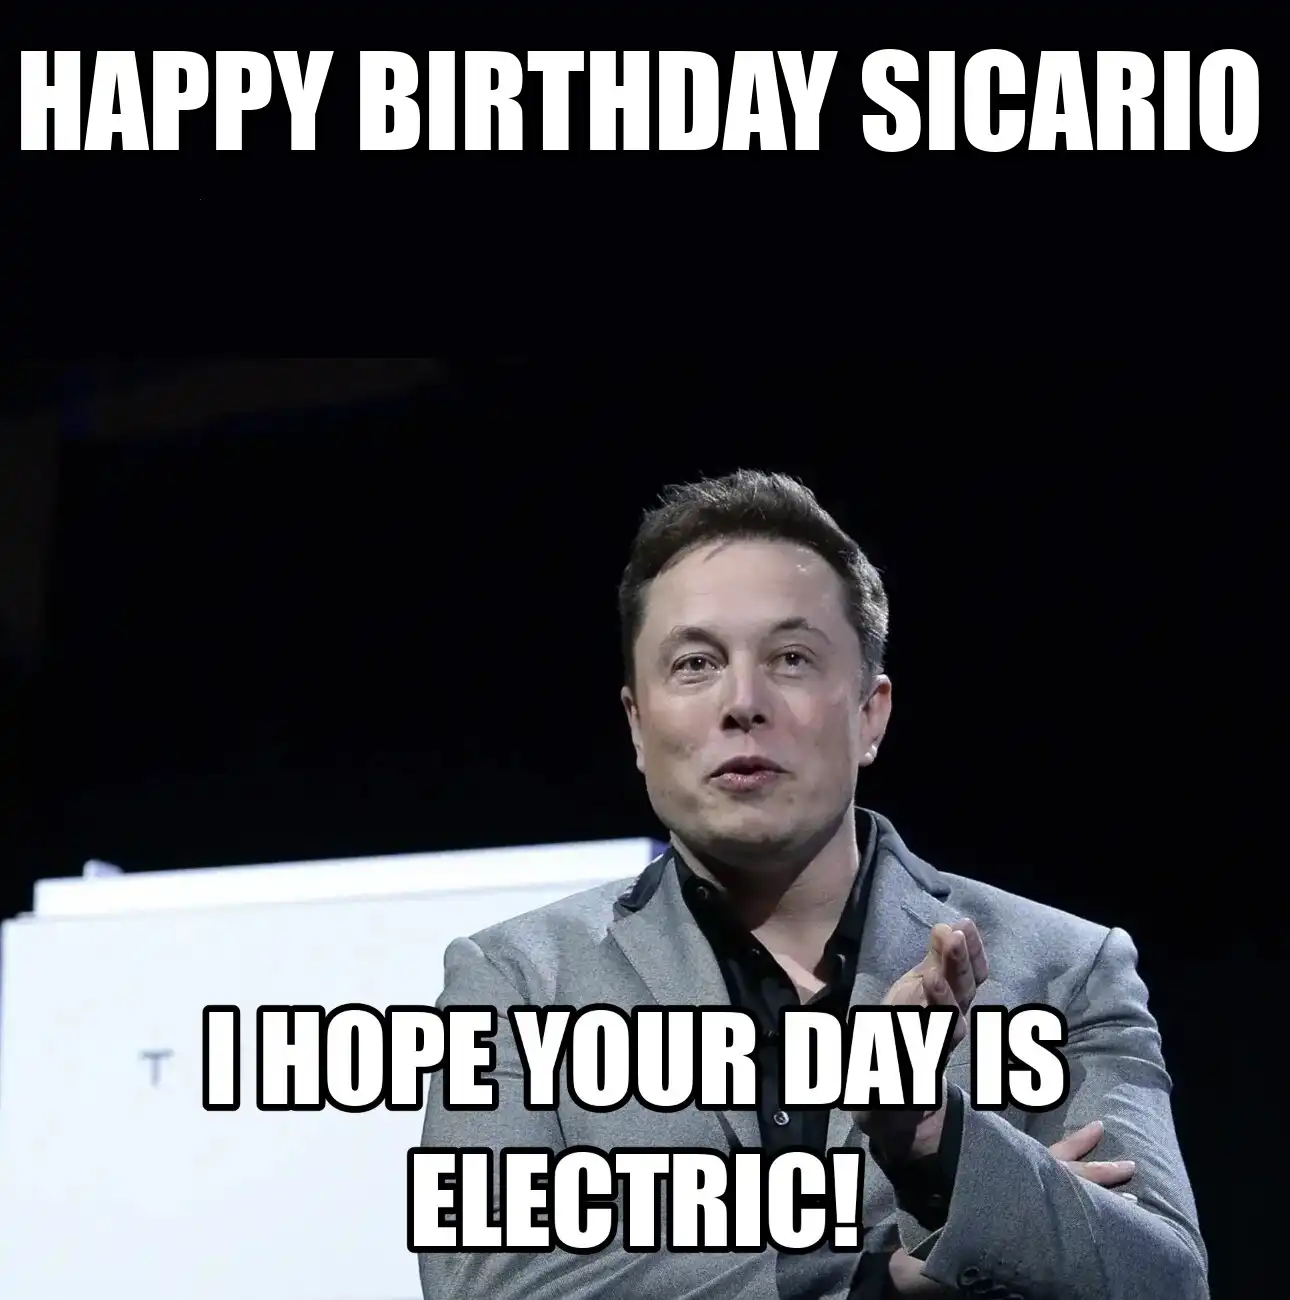 Happy Birthday Sicario I Hope Your Day Is Electric Meme